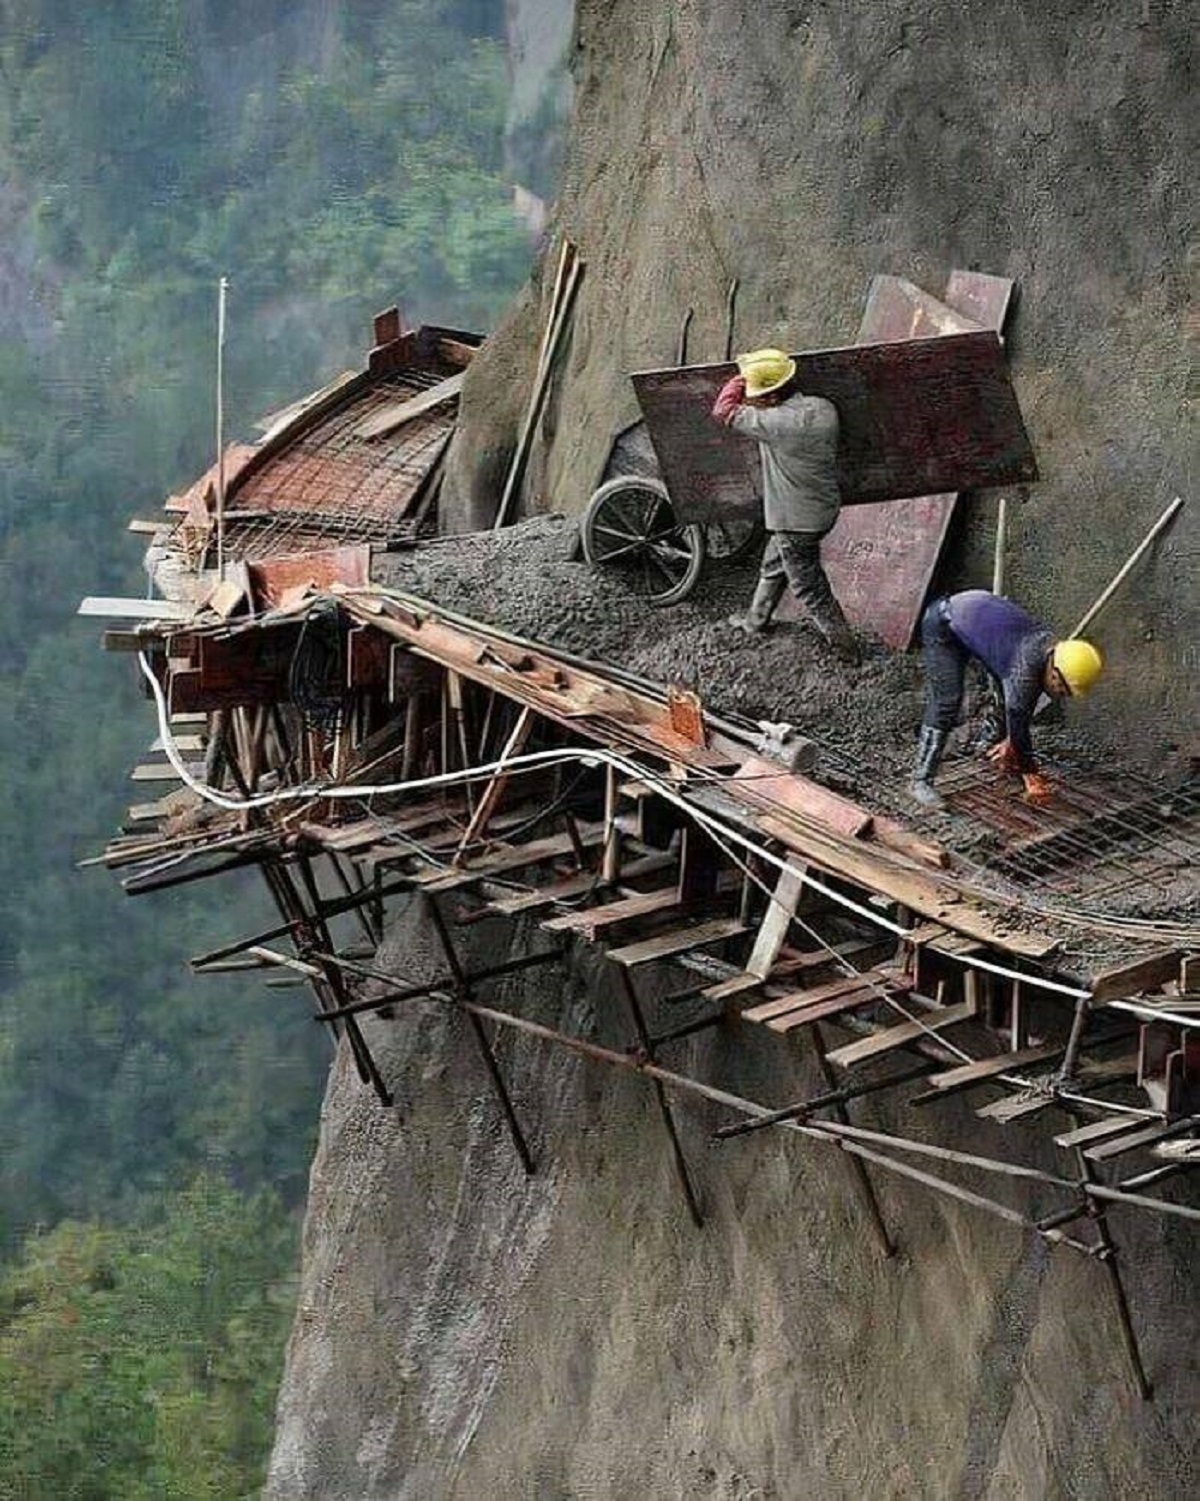 "Workers Building A Mountain Road, China"